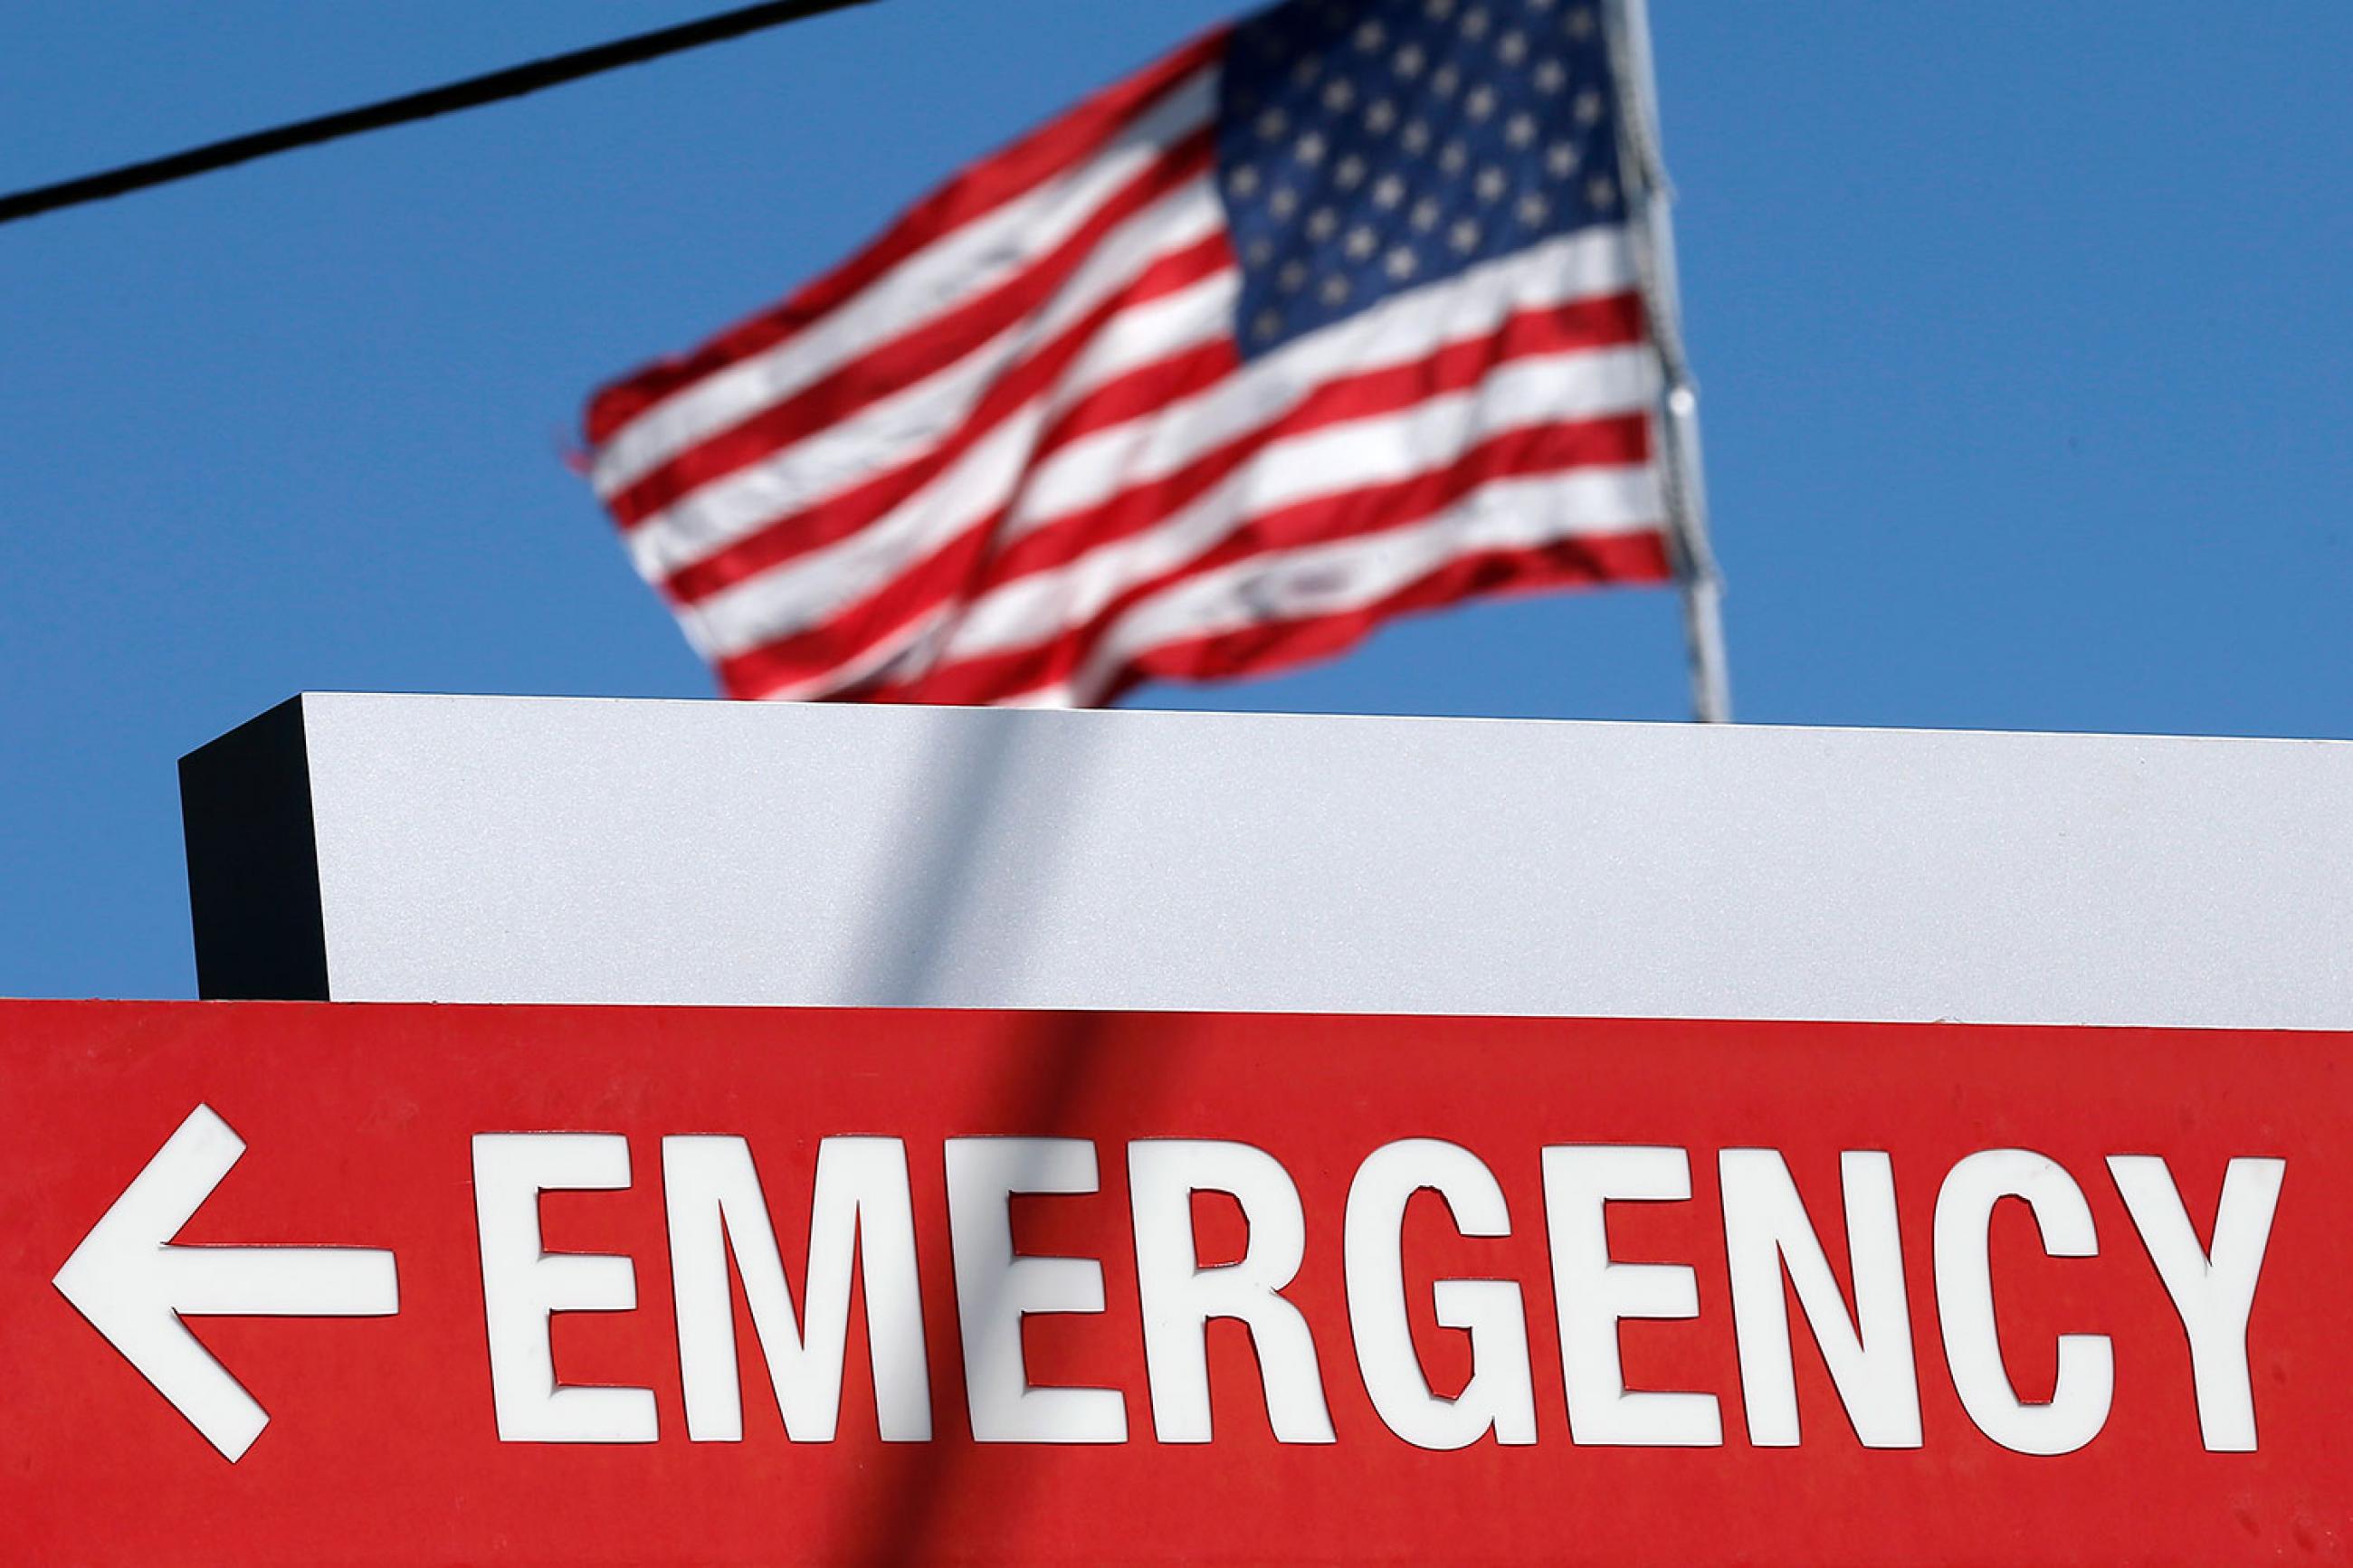 An entrance sign to the Texas Health Presbyterian Hospital in Dallas, Texas, on October 4, 2014. The sign says “EMERGENCY” and points to the left. In the background we can see an American flag billowing against a brilliant clear blue sky. REUTERS/Jim Young